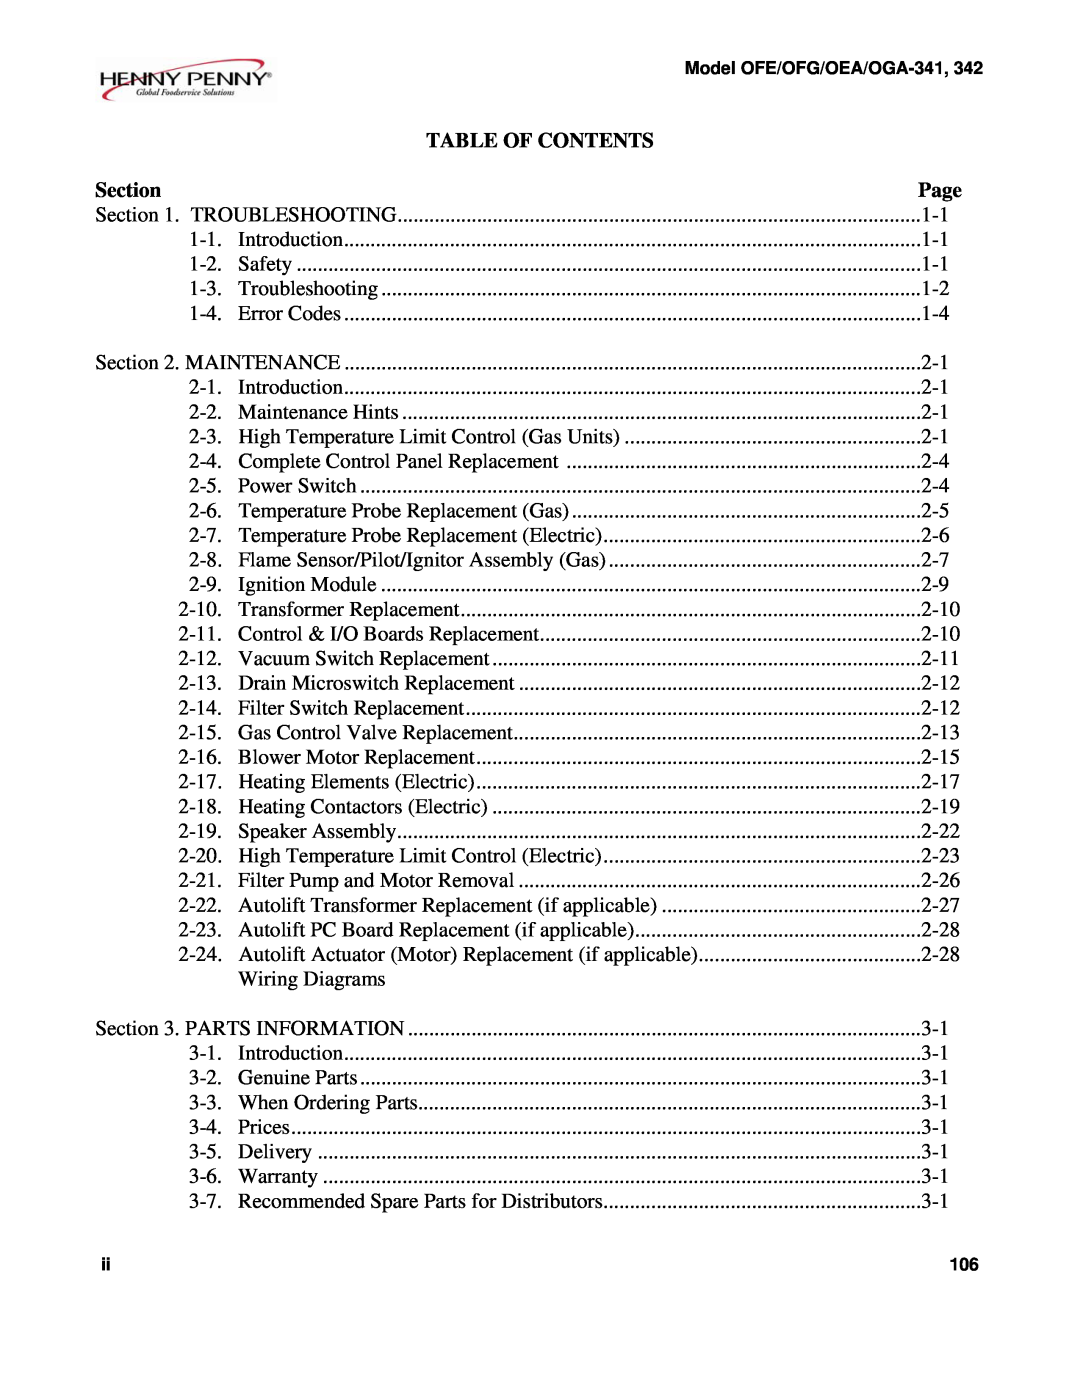 Henny Penny OFE/OFG-342, OFE/OFG-341, OEA/OGA-342, OEA/OGA-341 technical manual Table Of Contents, Section, Page 